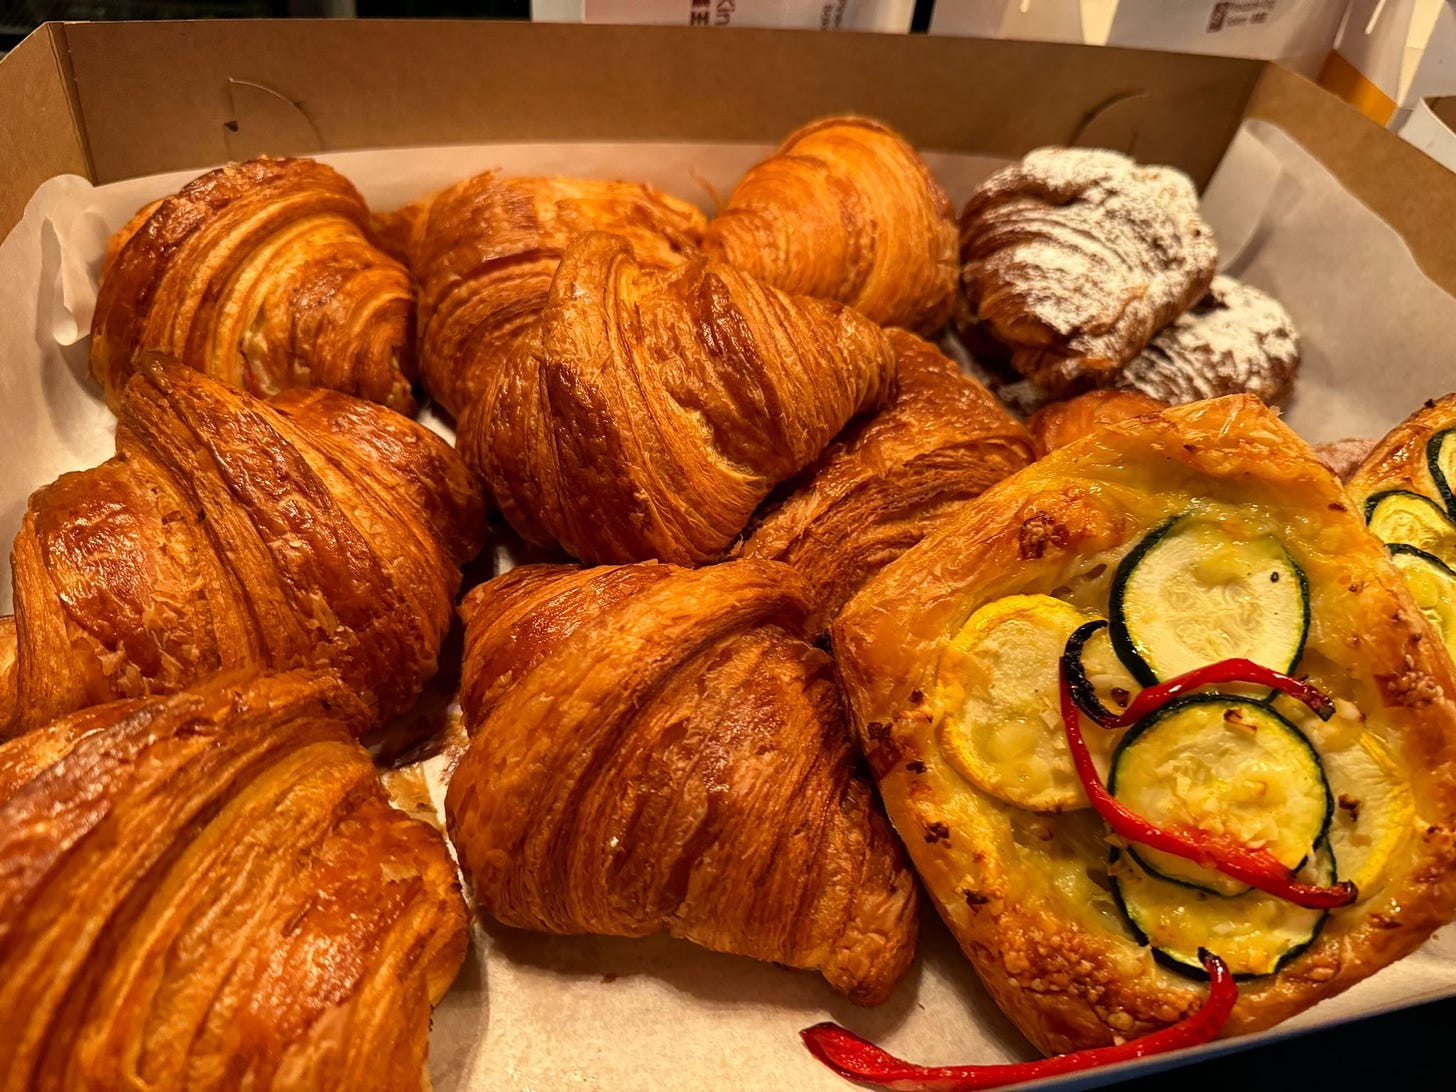 A cardboard box, lined with parchment paper, filled with croissants and other baked goods.